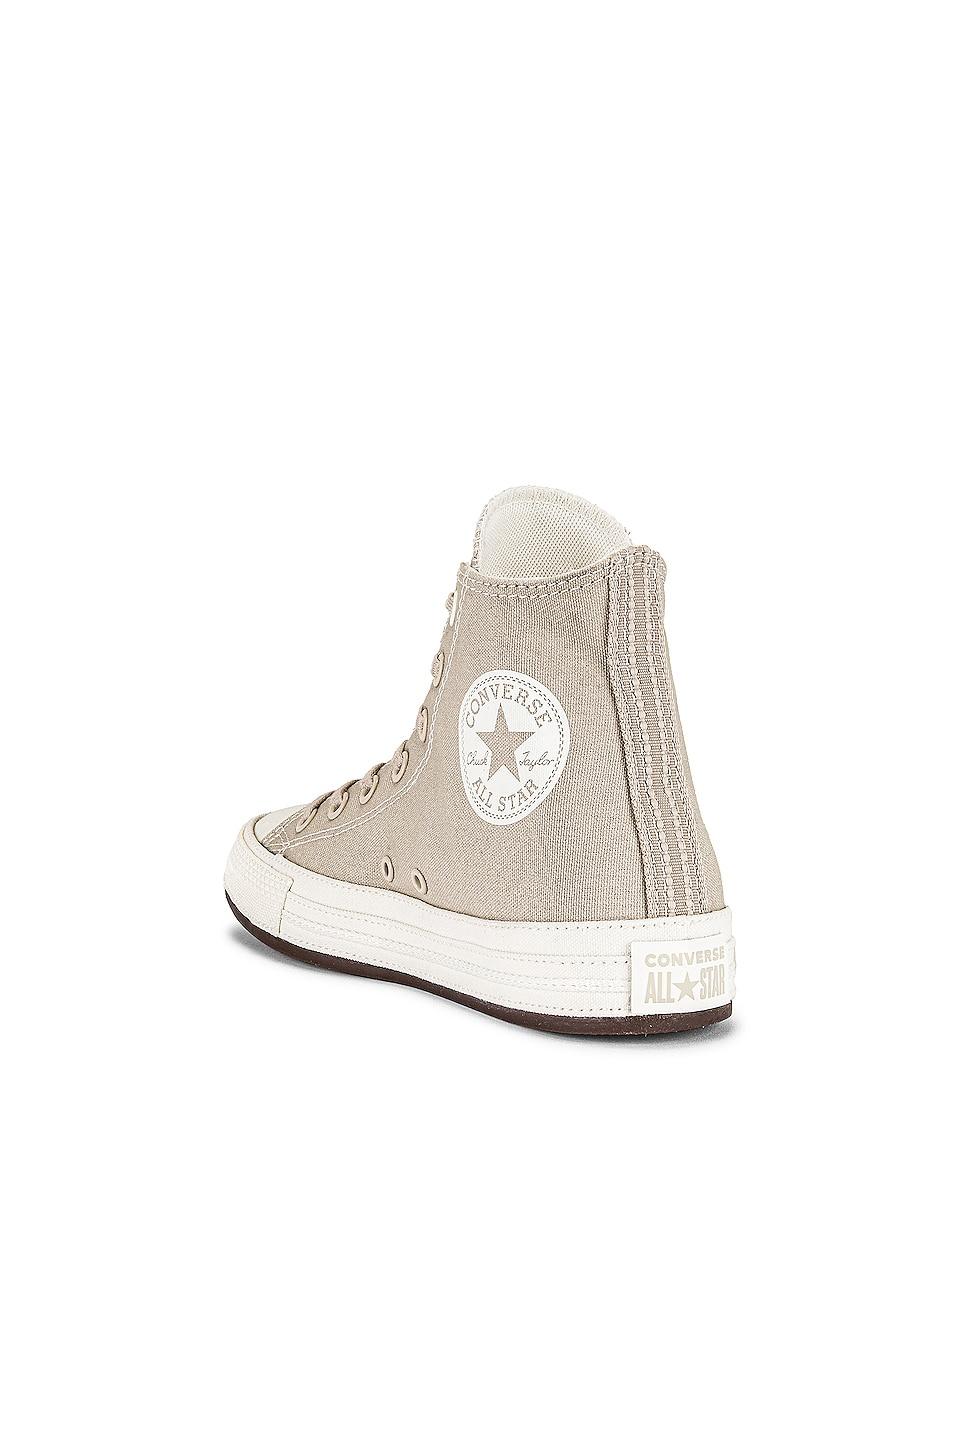 Converse Chuck Taylor All Star Workwear Textiles Sneaker in White | Lyst